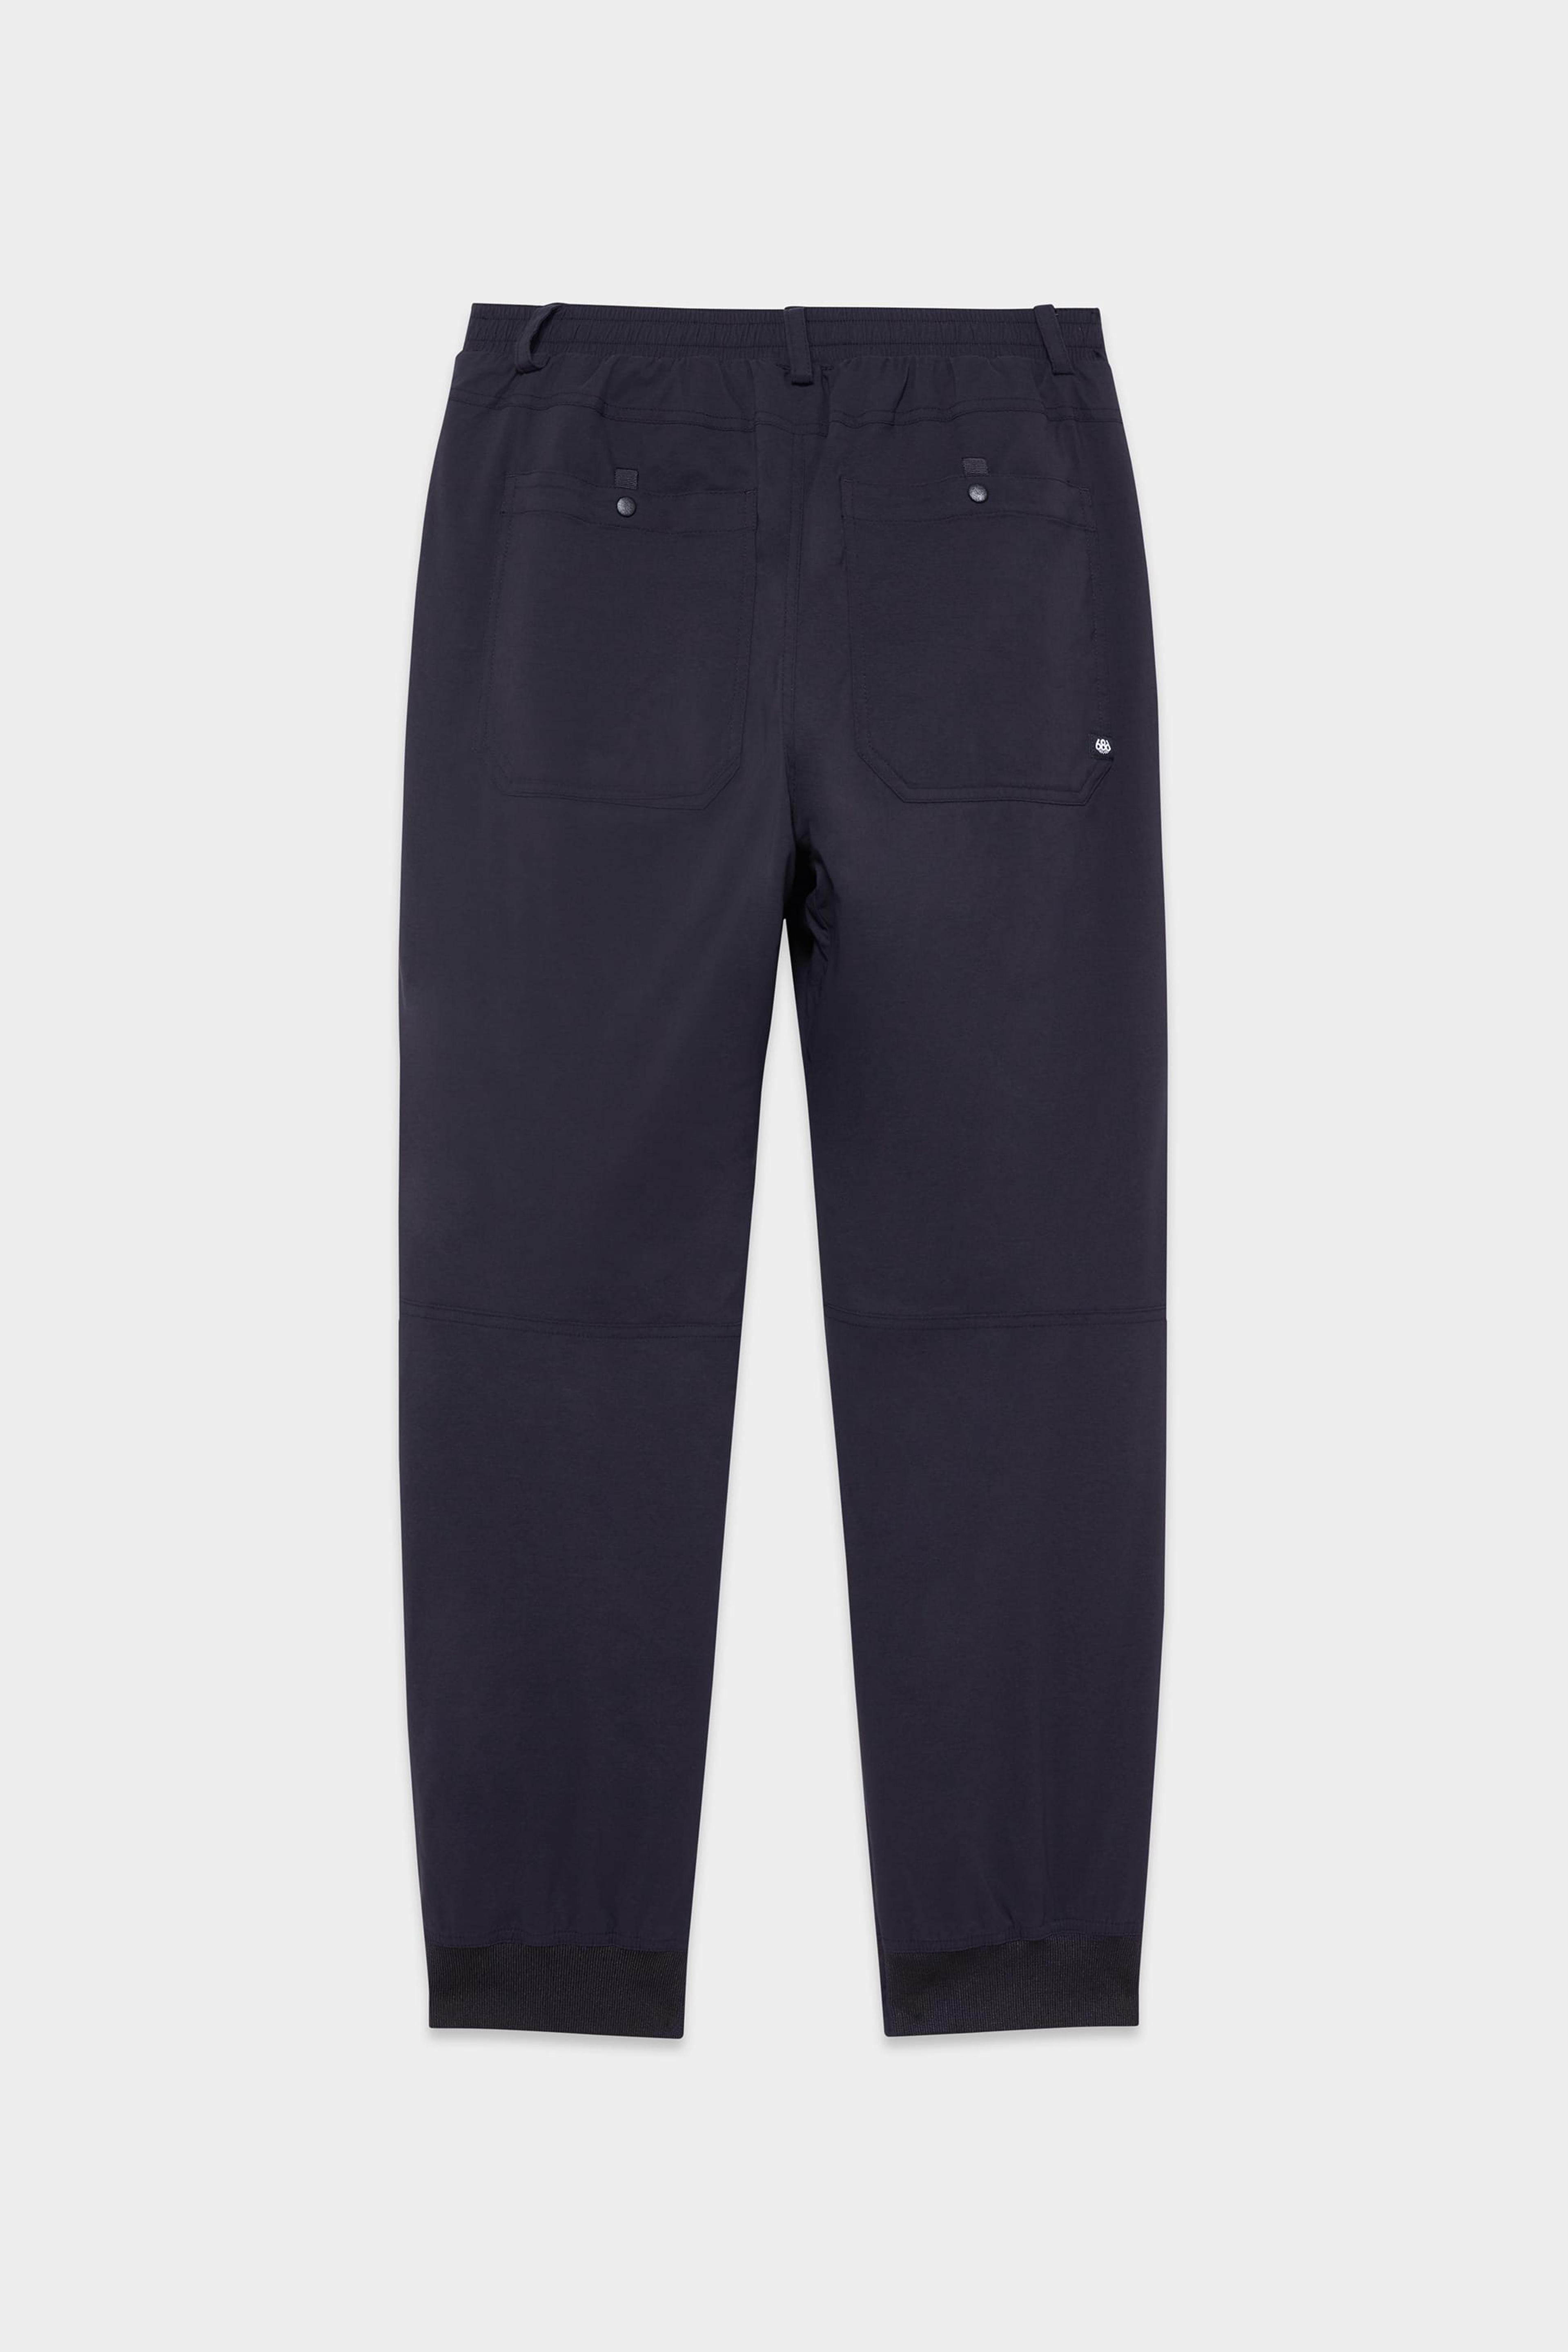 Alternate View 38 of 686 Men's Thermadry Merino-Lined Insulated Pant